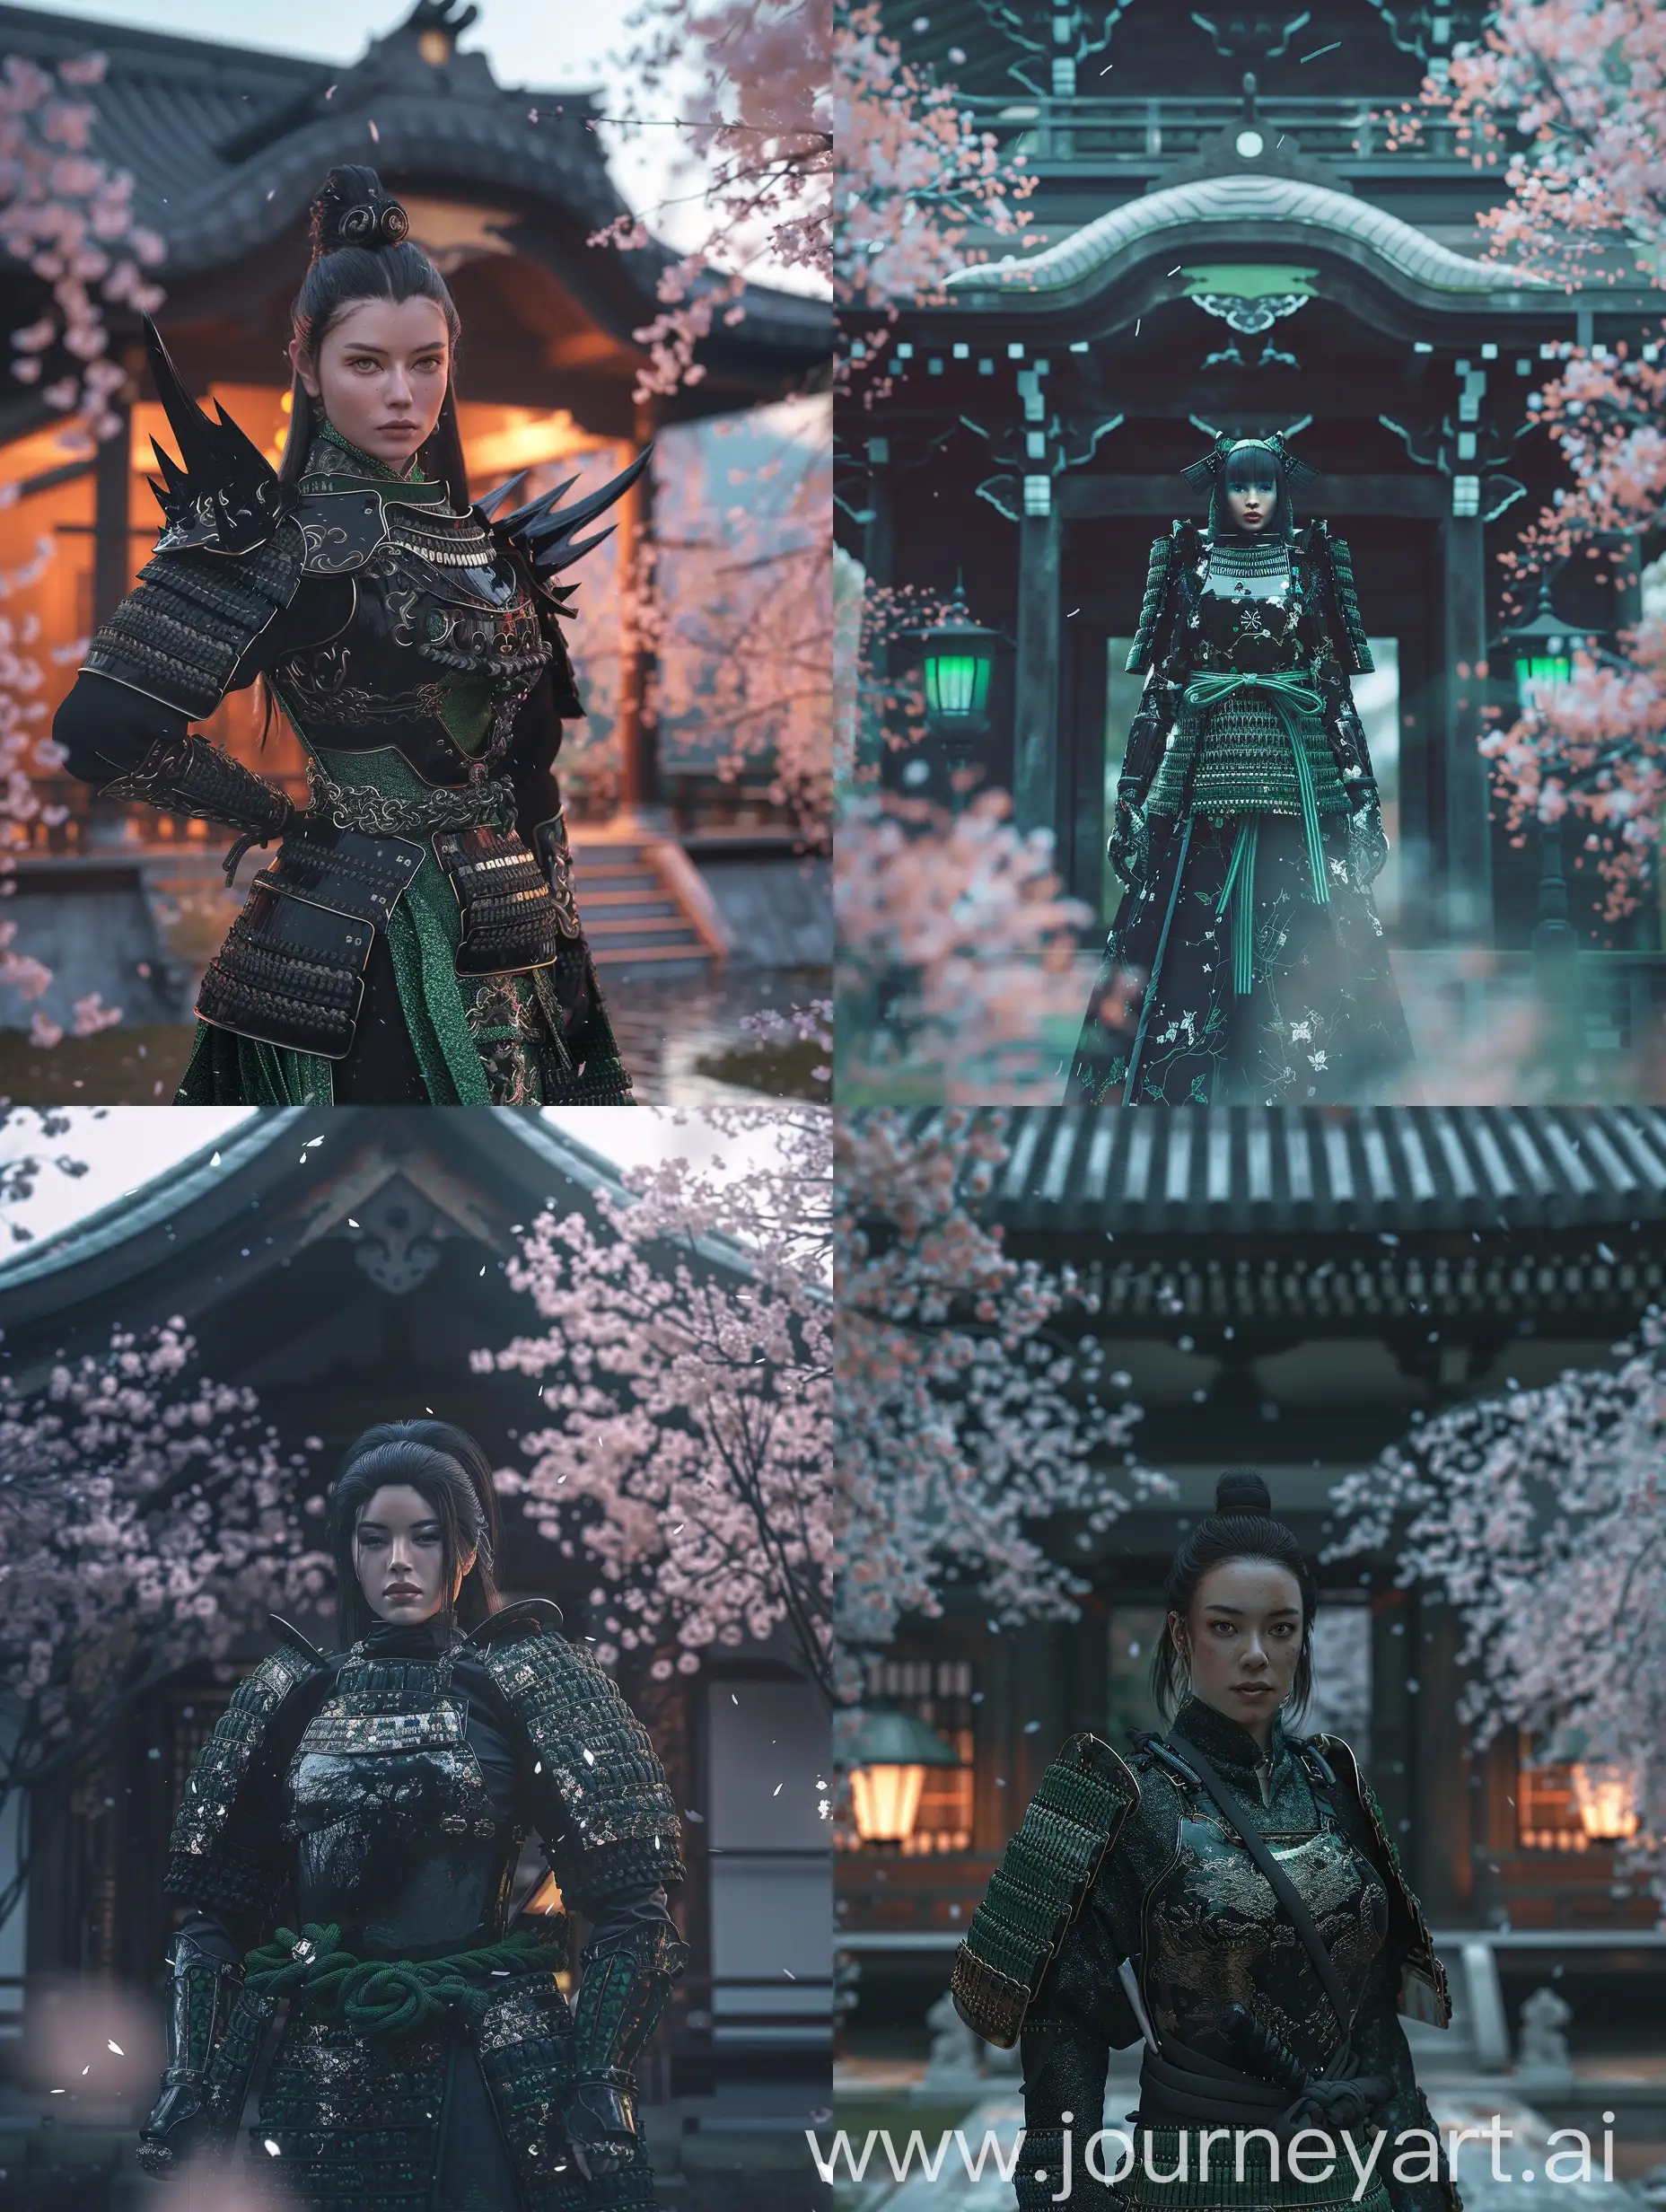 Character: A female samurai in a stunning black and green ō-yoroi armor. The armor's sharp details highlight its design and the character's strength.
Environment: A traditional Japanese temple surrounded by cherry blossom trees. The temple's architecture is clearly shown, enhancing its beauty.
Background: A detailed front view of the Japanese temple. The temple's facade adds to the scene's depth.
Style: A black and green ō-yoroi fashion editorial that blends samurai tradition with modern style. The mix of old and new is clearly shown.
Photography Type: A cinematic fashion editorial that captures the details of the ō-yoroi samurai warrior. The image is carefully composed for visual impact.
Theme: A fashion editorial campaign that celebrates the ō-yoroi samurai warrior and the blend of tradition and modernity. The theme is detailed, immersing the viewer in the samurai world.
Visual Filters: A fashion film Look-Up Table (LUT) is used to add depth to the image and make it clearer.
Camera Effects: Camera blur and haze effects, and a Cinematic Film Lut are used to add depth and a sense of atmosphere to the image.
Time: The scene is set in the evening, creating a serene and magical feel. The soft evening lighting highlights the scene's details.
Resolution: The image is high resolution, preserving all the intricate details and enhancing the viewer's experience.
Key Element: The technical textile of the black and green ō-yoroi armor is the focus, with its exquisite craftsmanship and detailing clearly shown.
Details: The ō-yoroi armor's detailed technical textile reflects the light, enhancing the samurai's presence and adding depth to the image. All details, big and small, are carefully shown, creating a visually and emotionally impactful image.